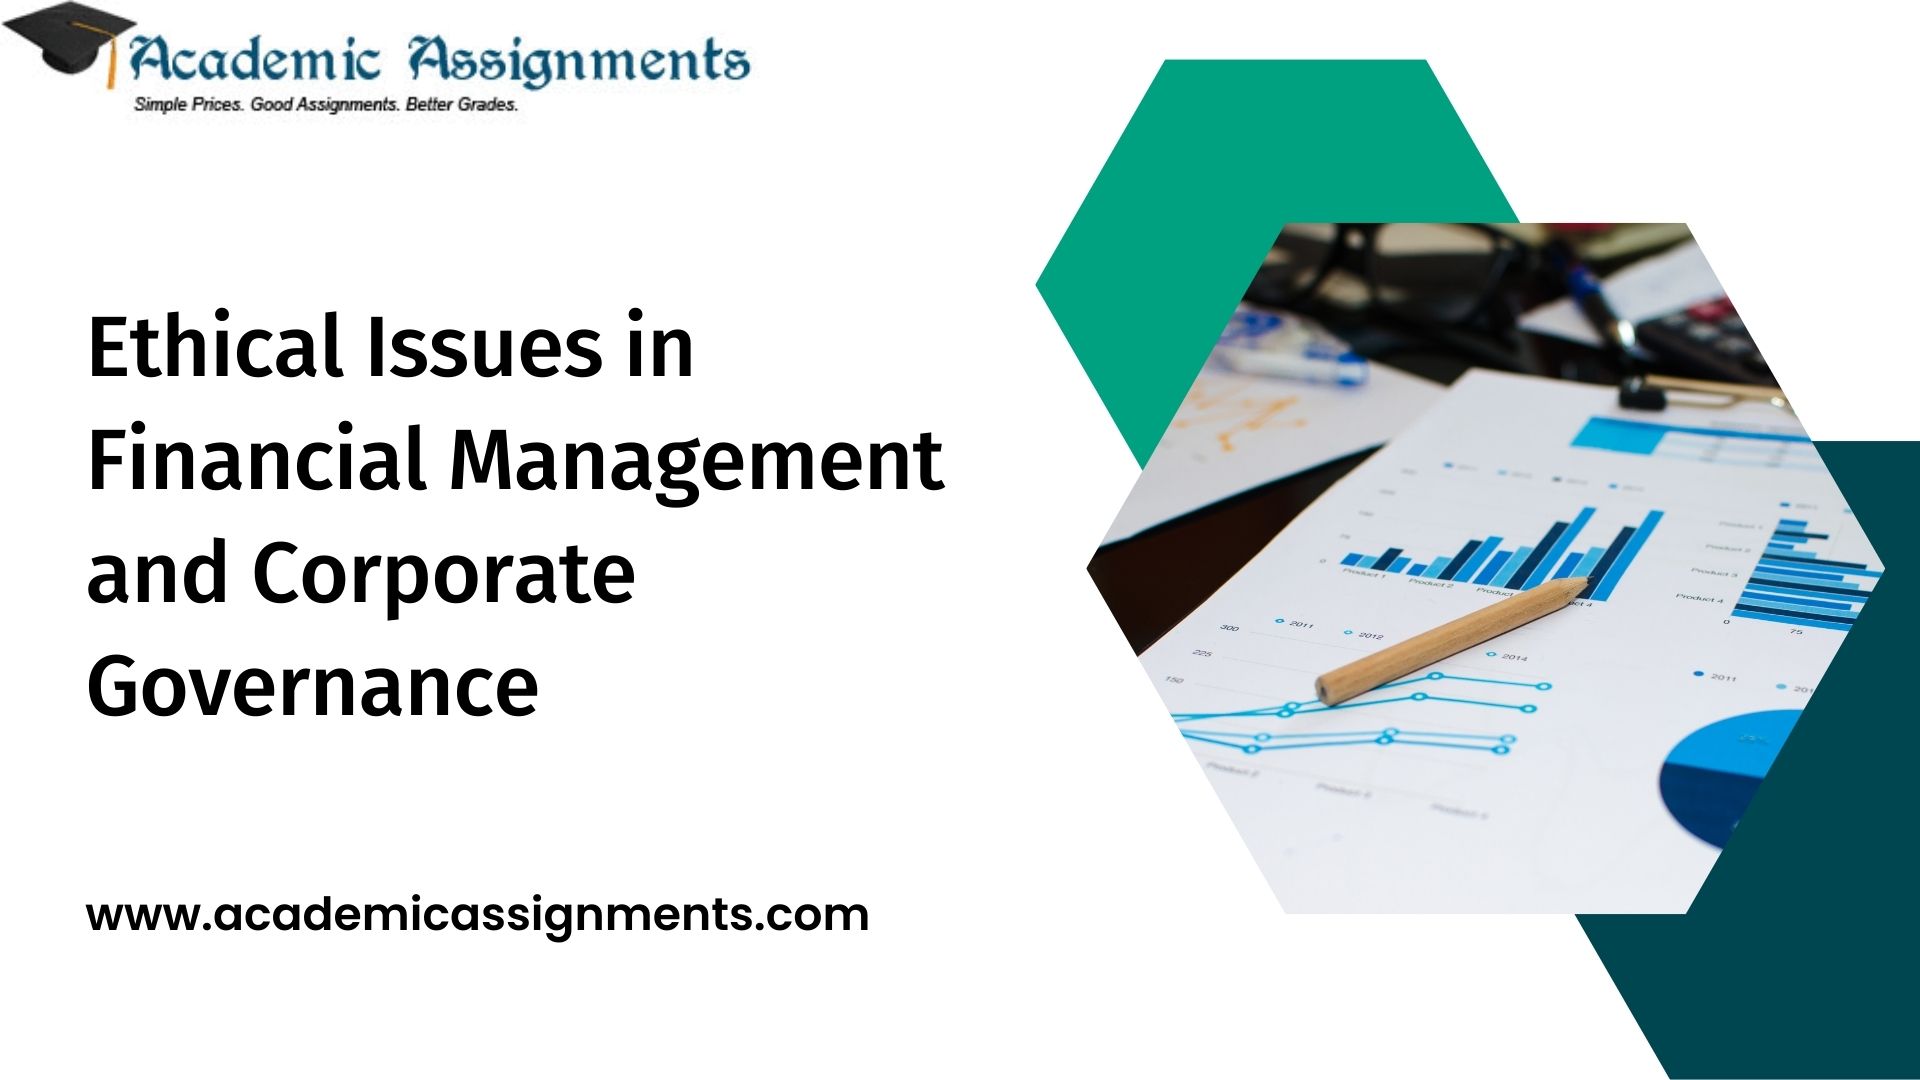 Ethical Issues in Financial Management and Corporate Governance